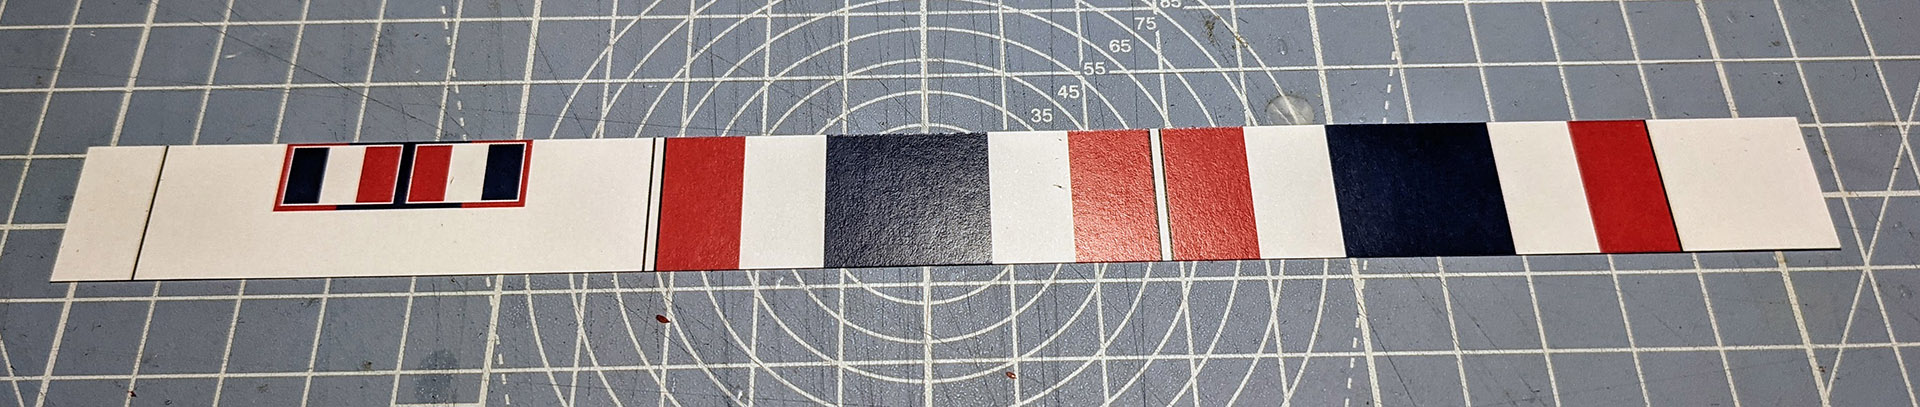 A single row of flags cut up top and bottom with a knife.